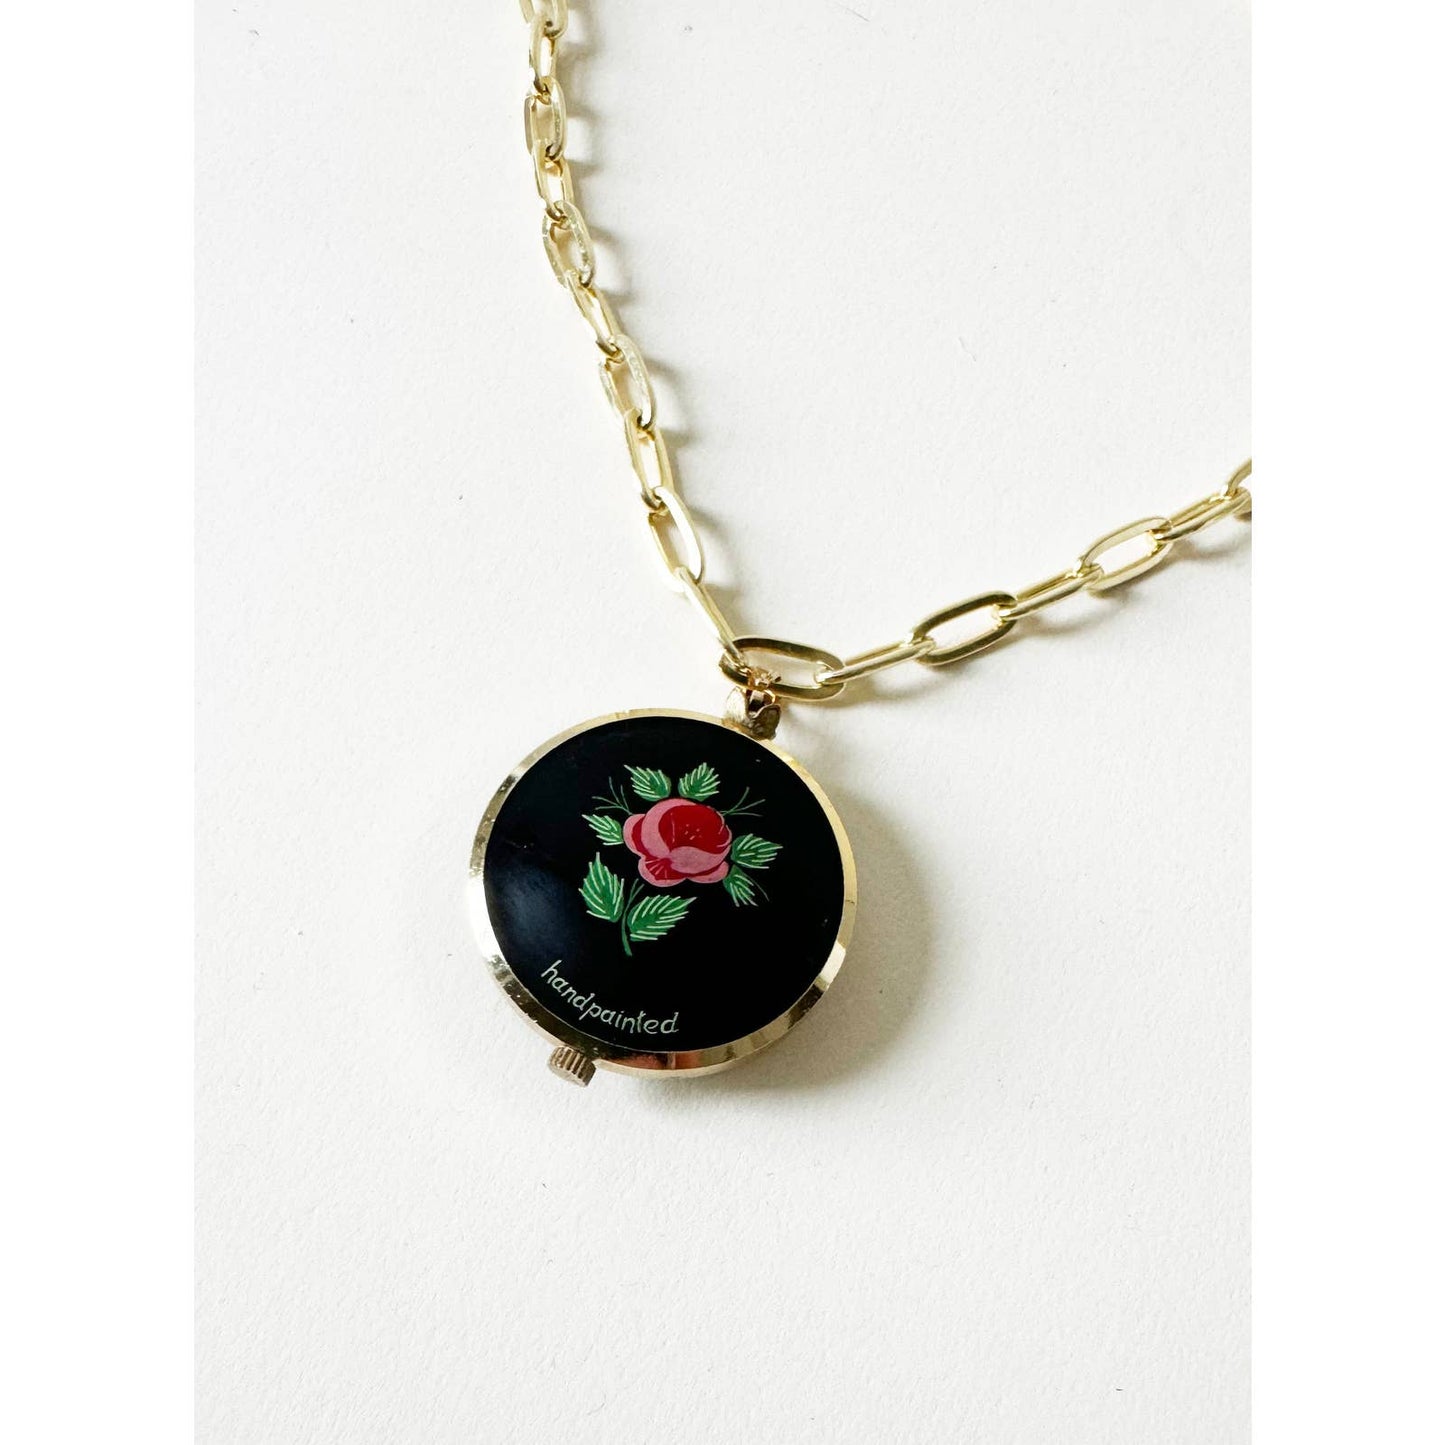 Watch Hand Painted Black Flower Charm Necklace | 925 Gold Vermeil Chain